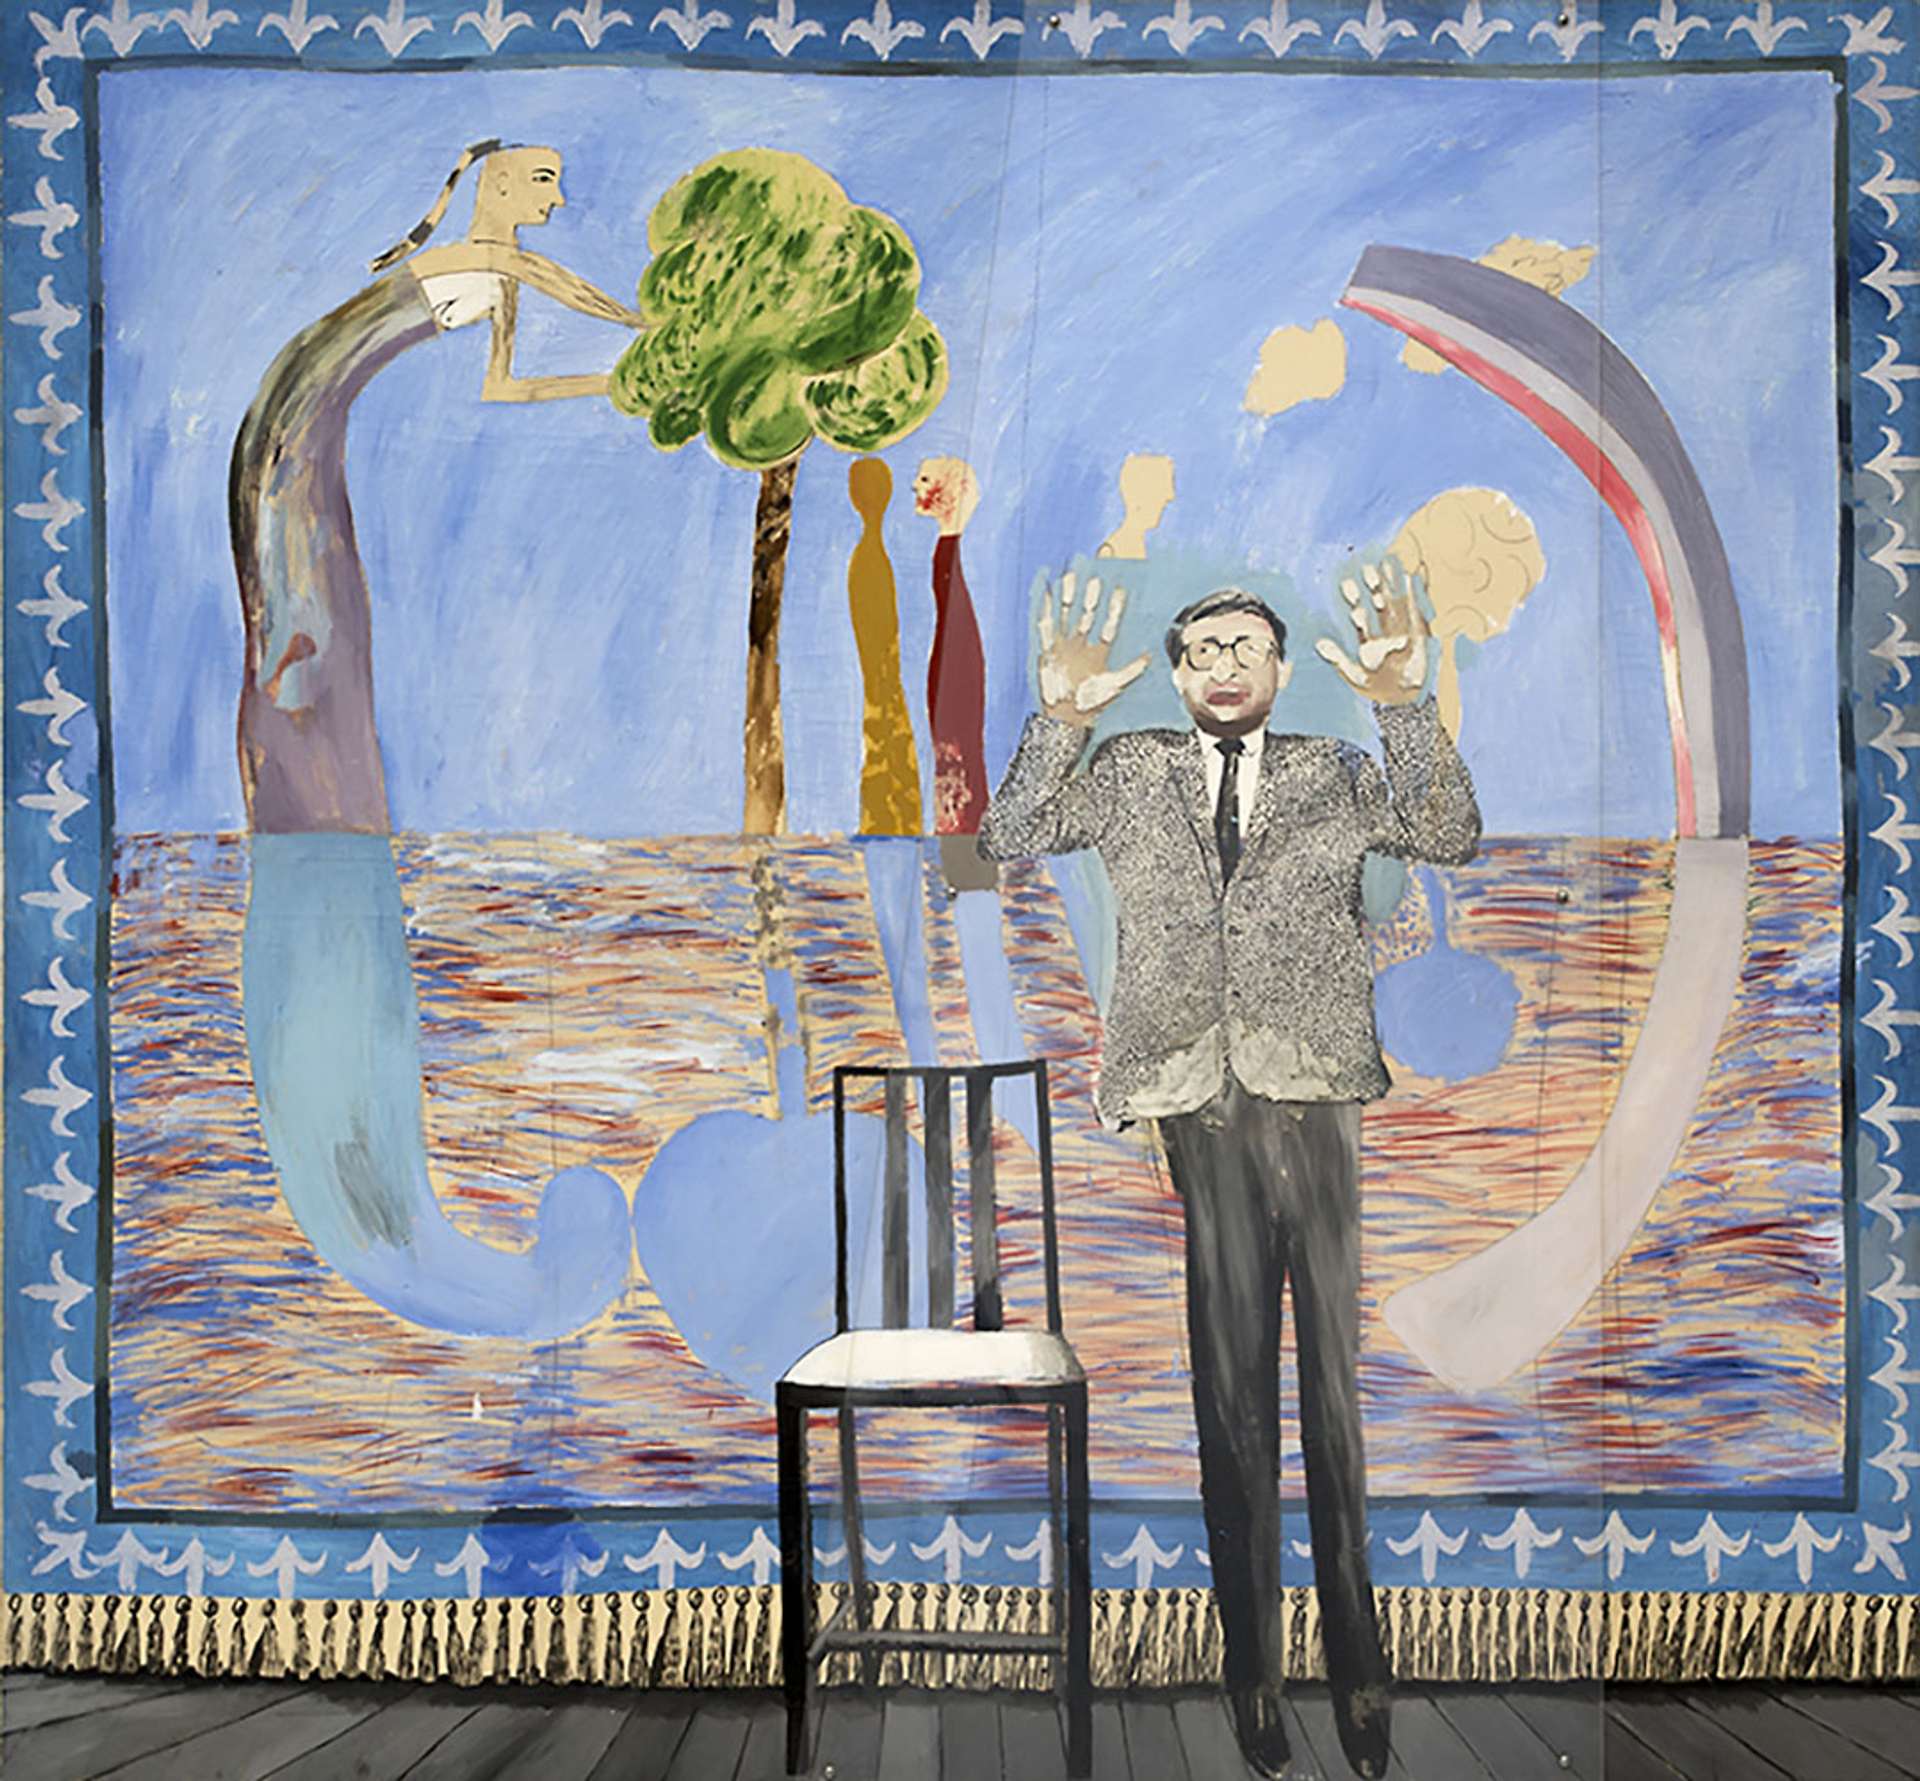 A man stood next to a chair with his hands raised and a decorative tapestry in the background depicting a large figure reaching over a tree